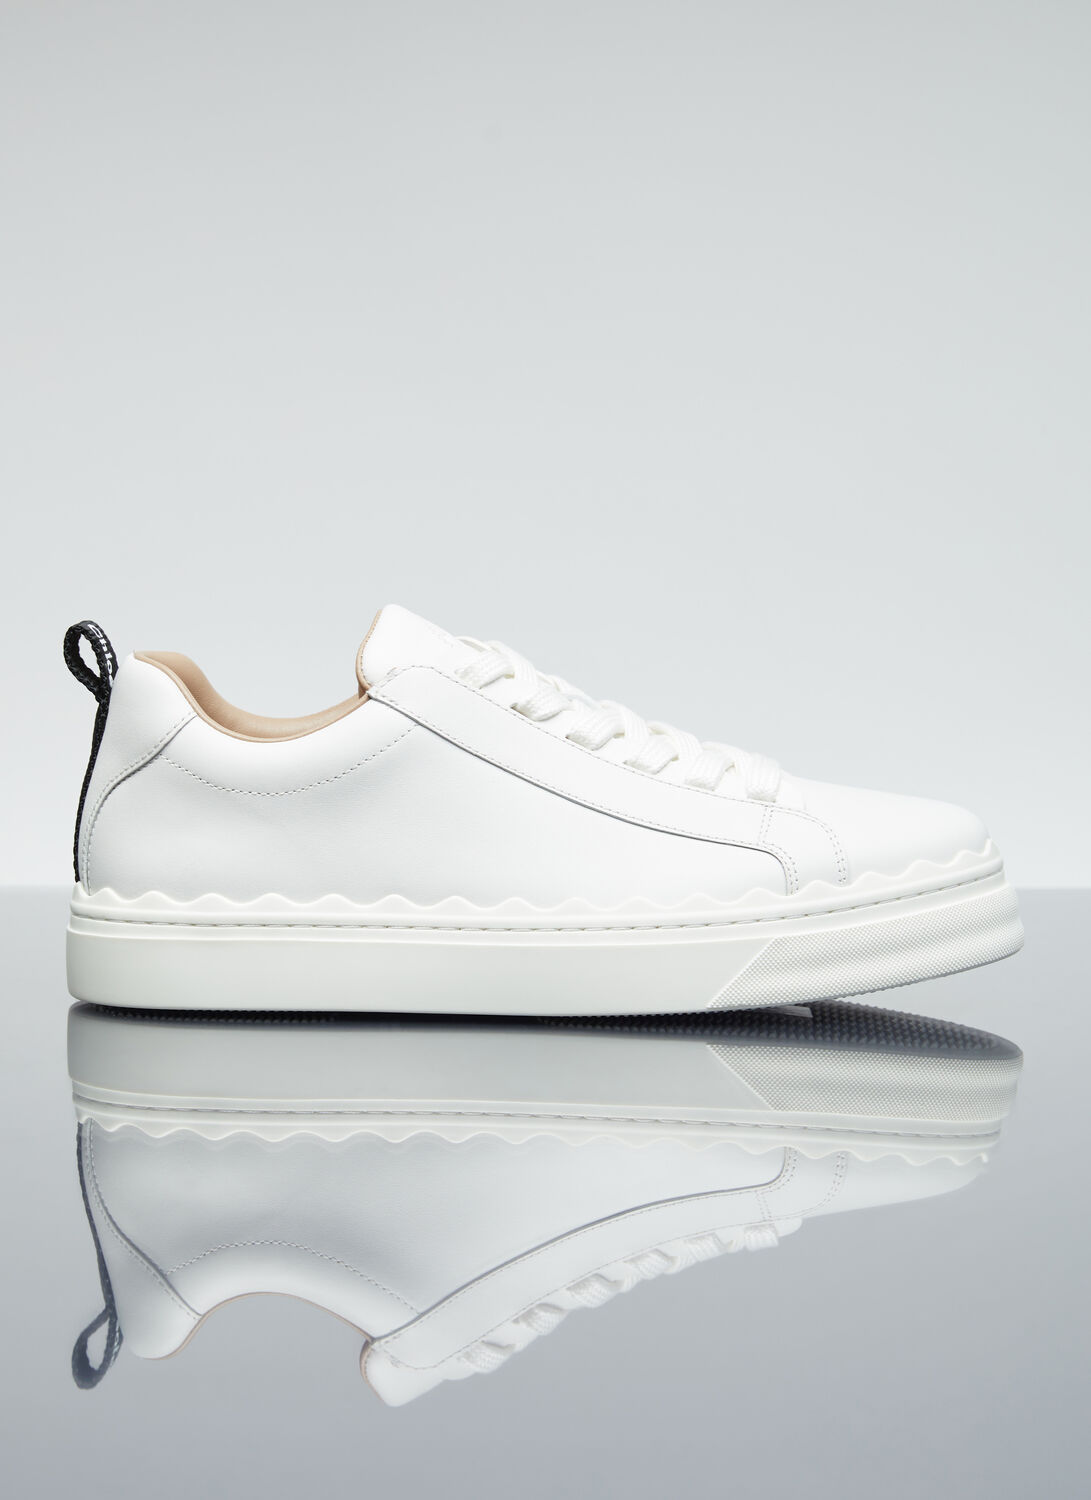 Chloé Lauren Leather Trainers In White